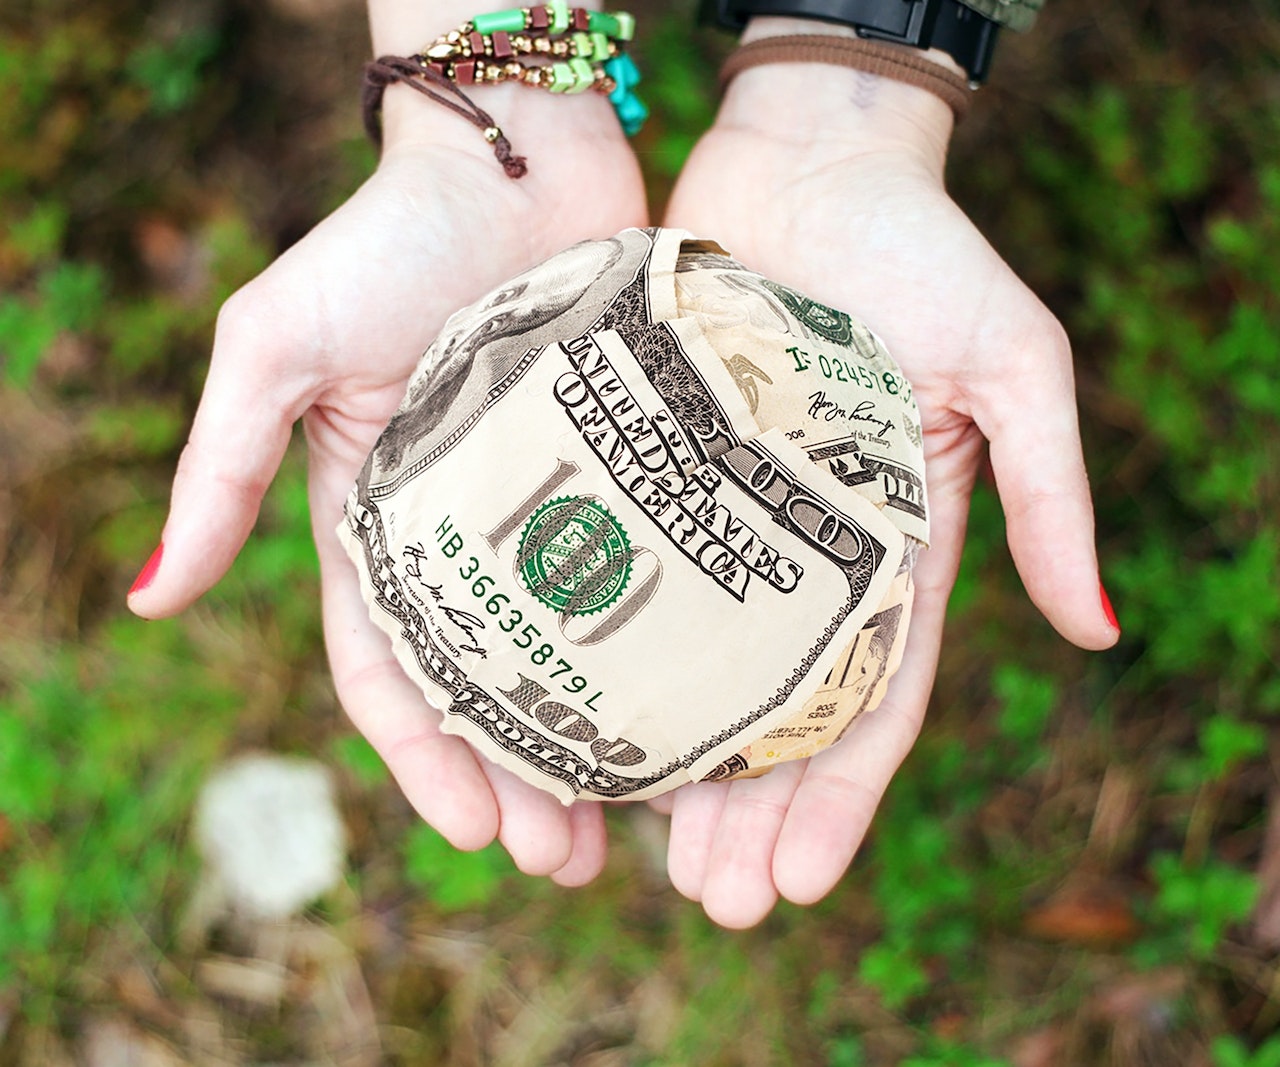 Two hands holding a ball of cash outwardly as a gift